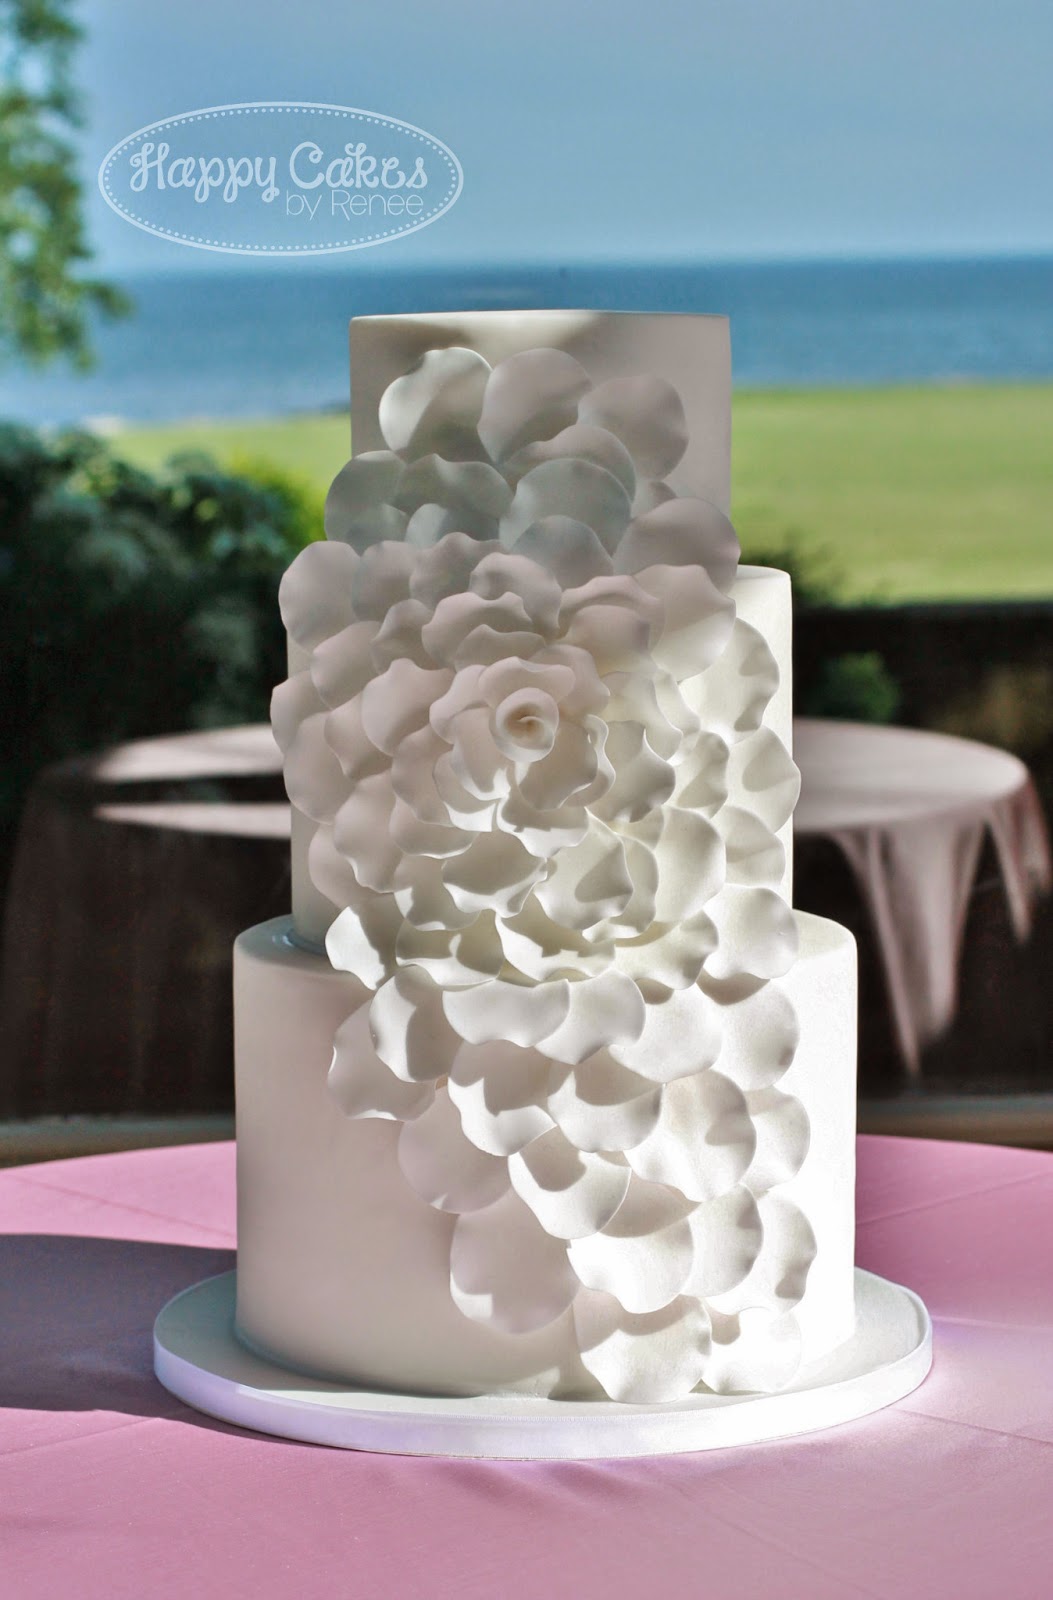 Chocolate Covered Marshmallows – Renee Conner Cake Design